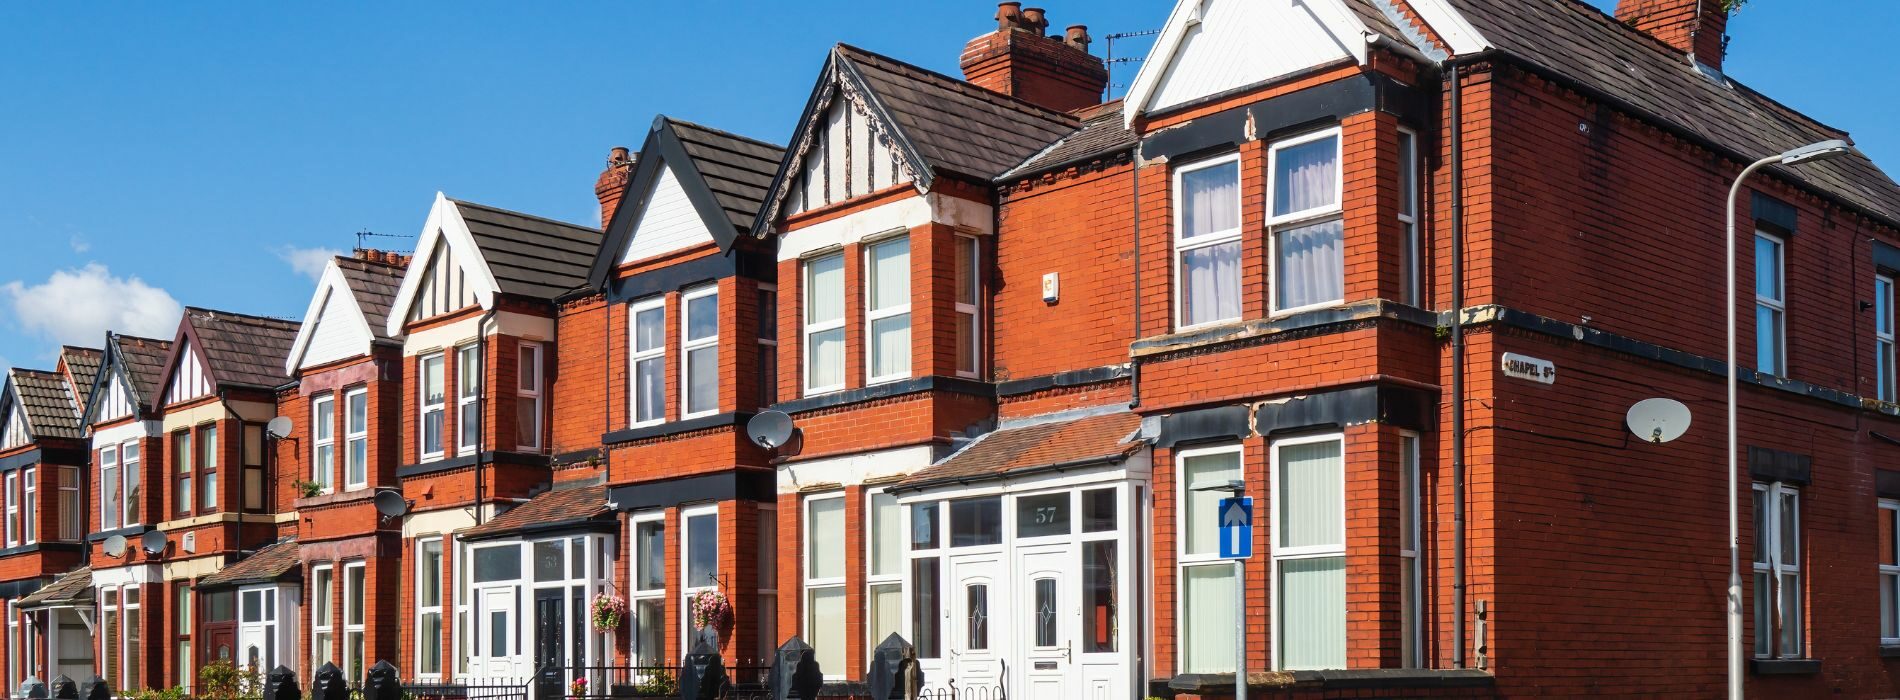 A picturesque row of red brick houses with white trim adorns the streets of Sutton, SM3.